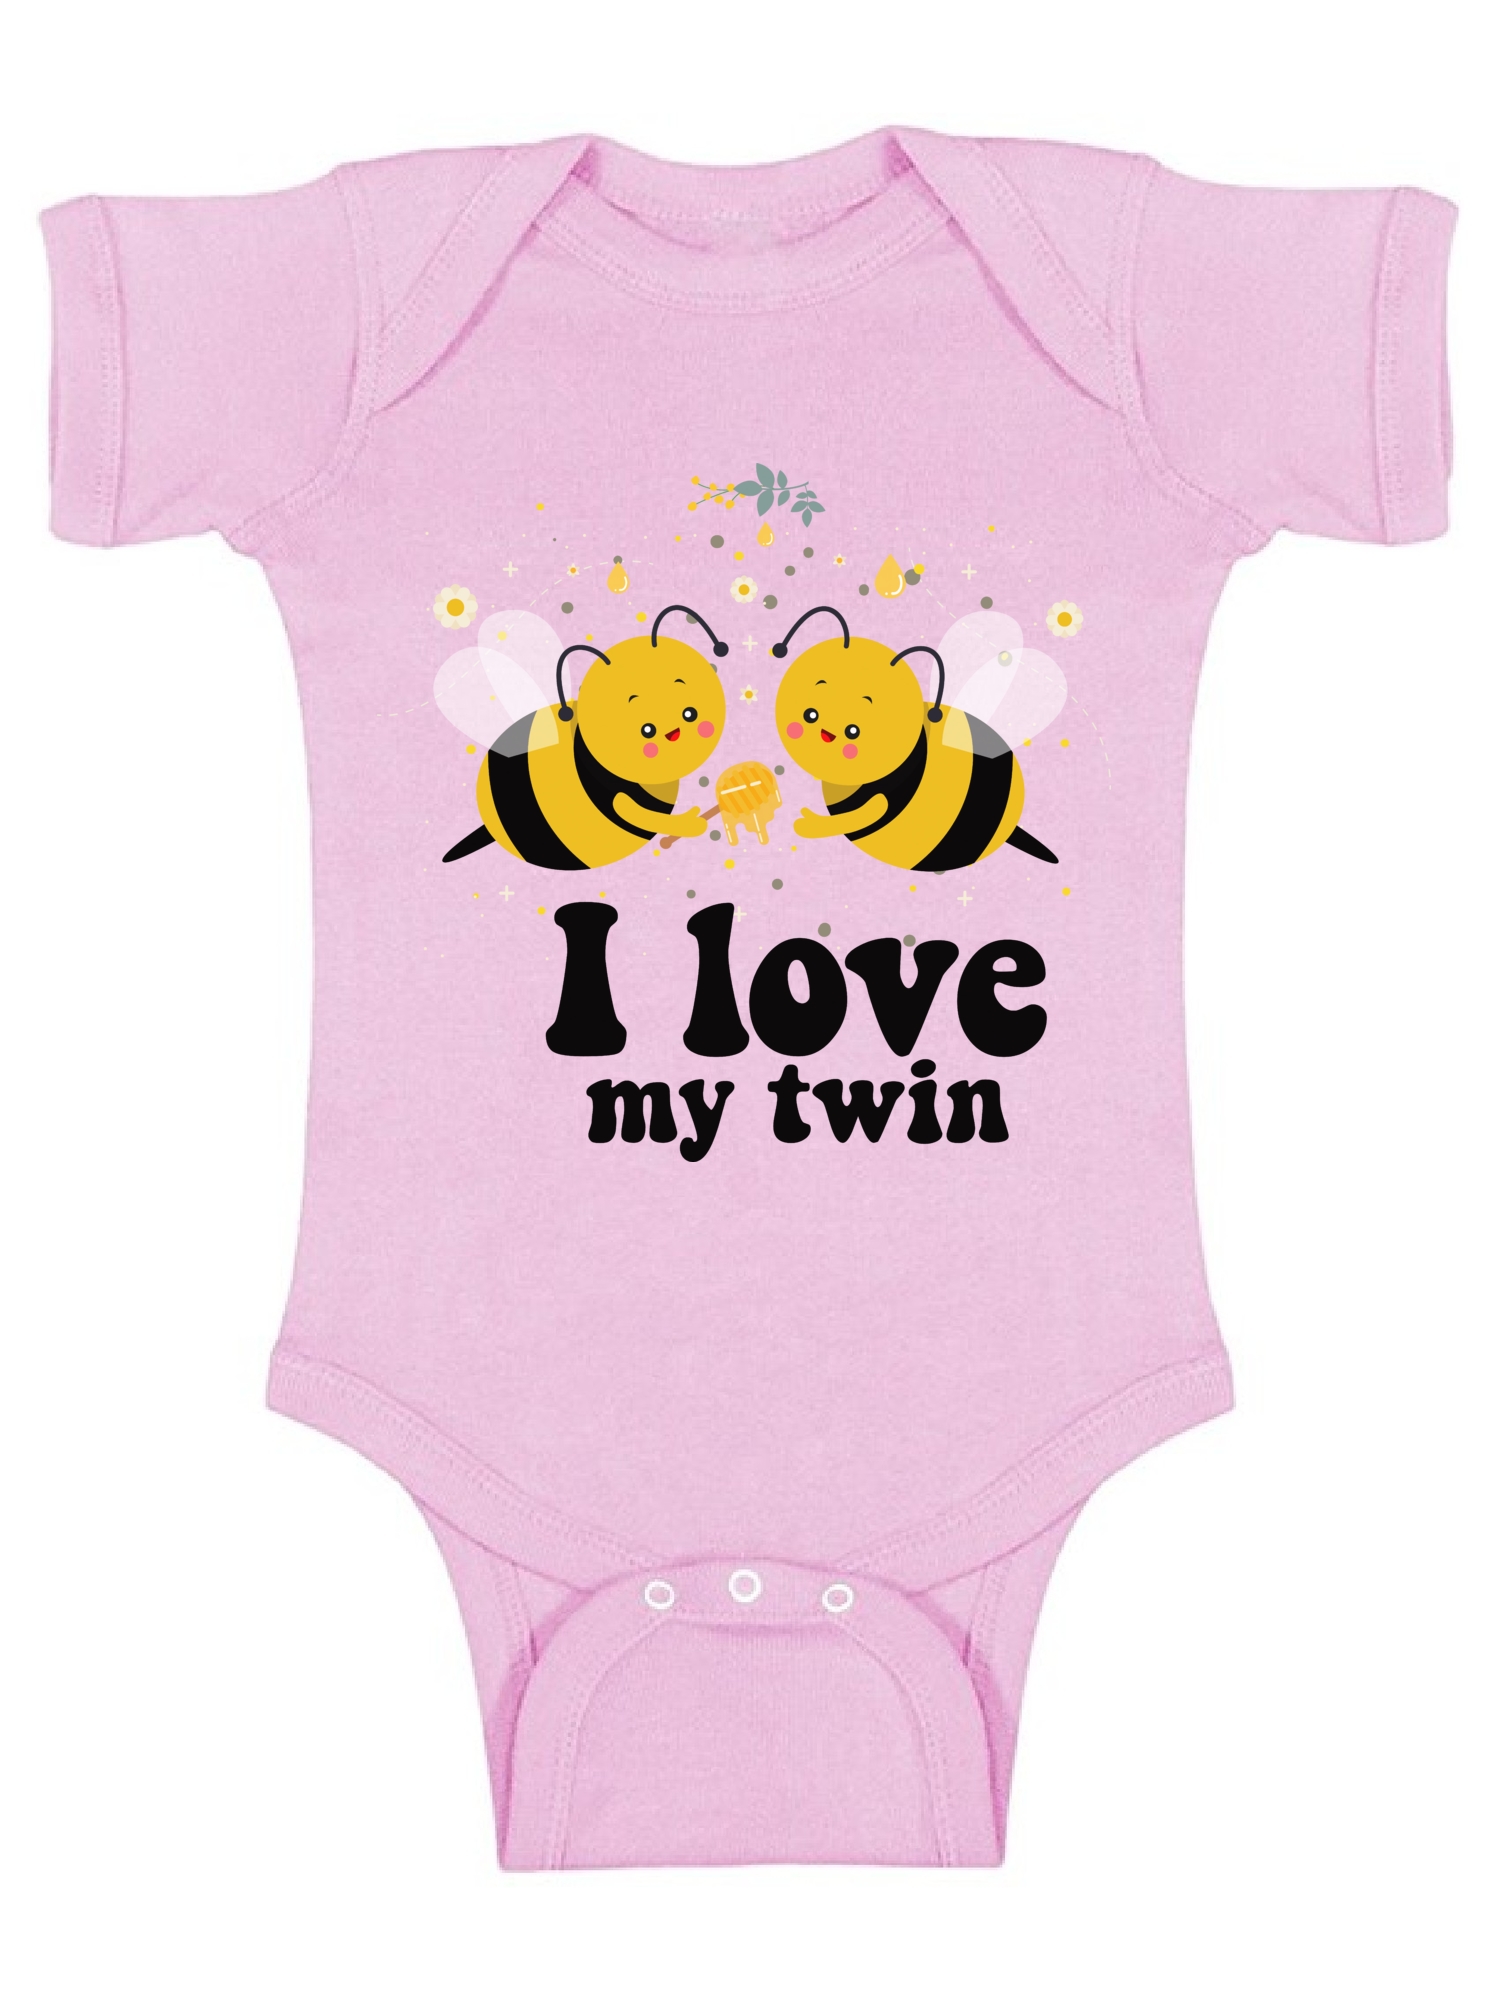 Awkward Styles Twin Bodysuit Short Sleeve for Newborn Baby Cute Twins Gifts for 1 Year Old I Love My Twin One Piece Top for Baby Boy I Love My Twin One Piece Top for Baby Girl Birthday Party Outfit - image 1 of 4